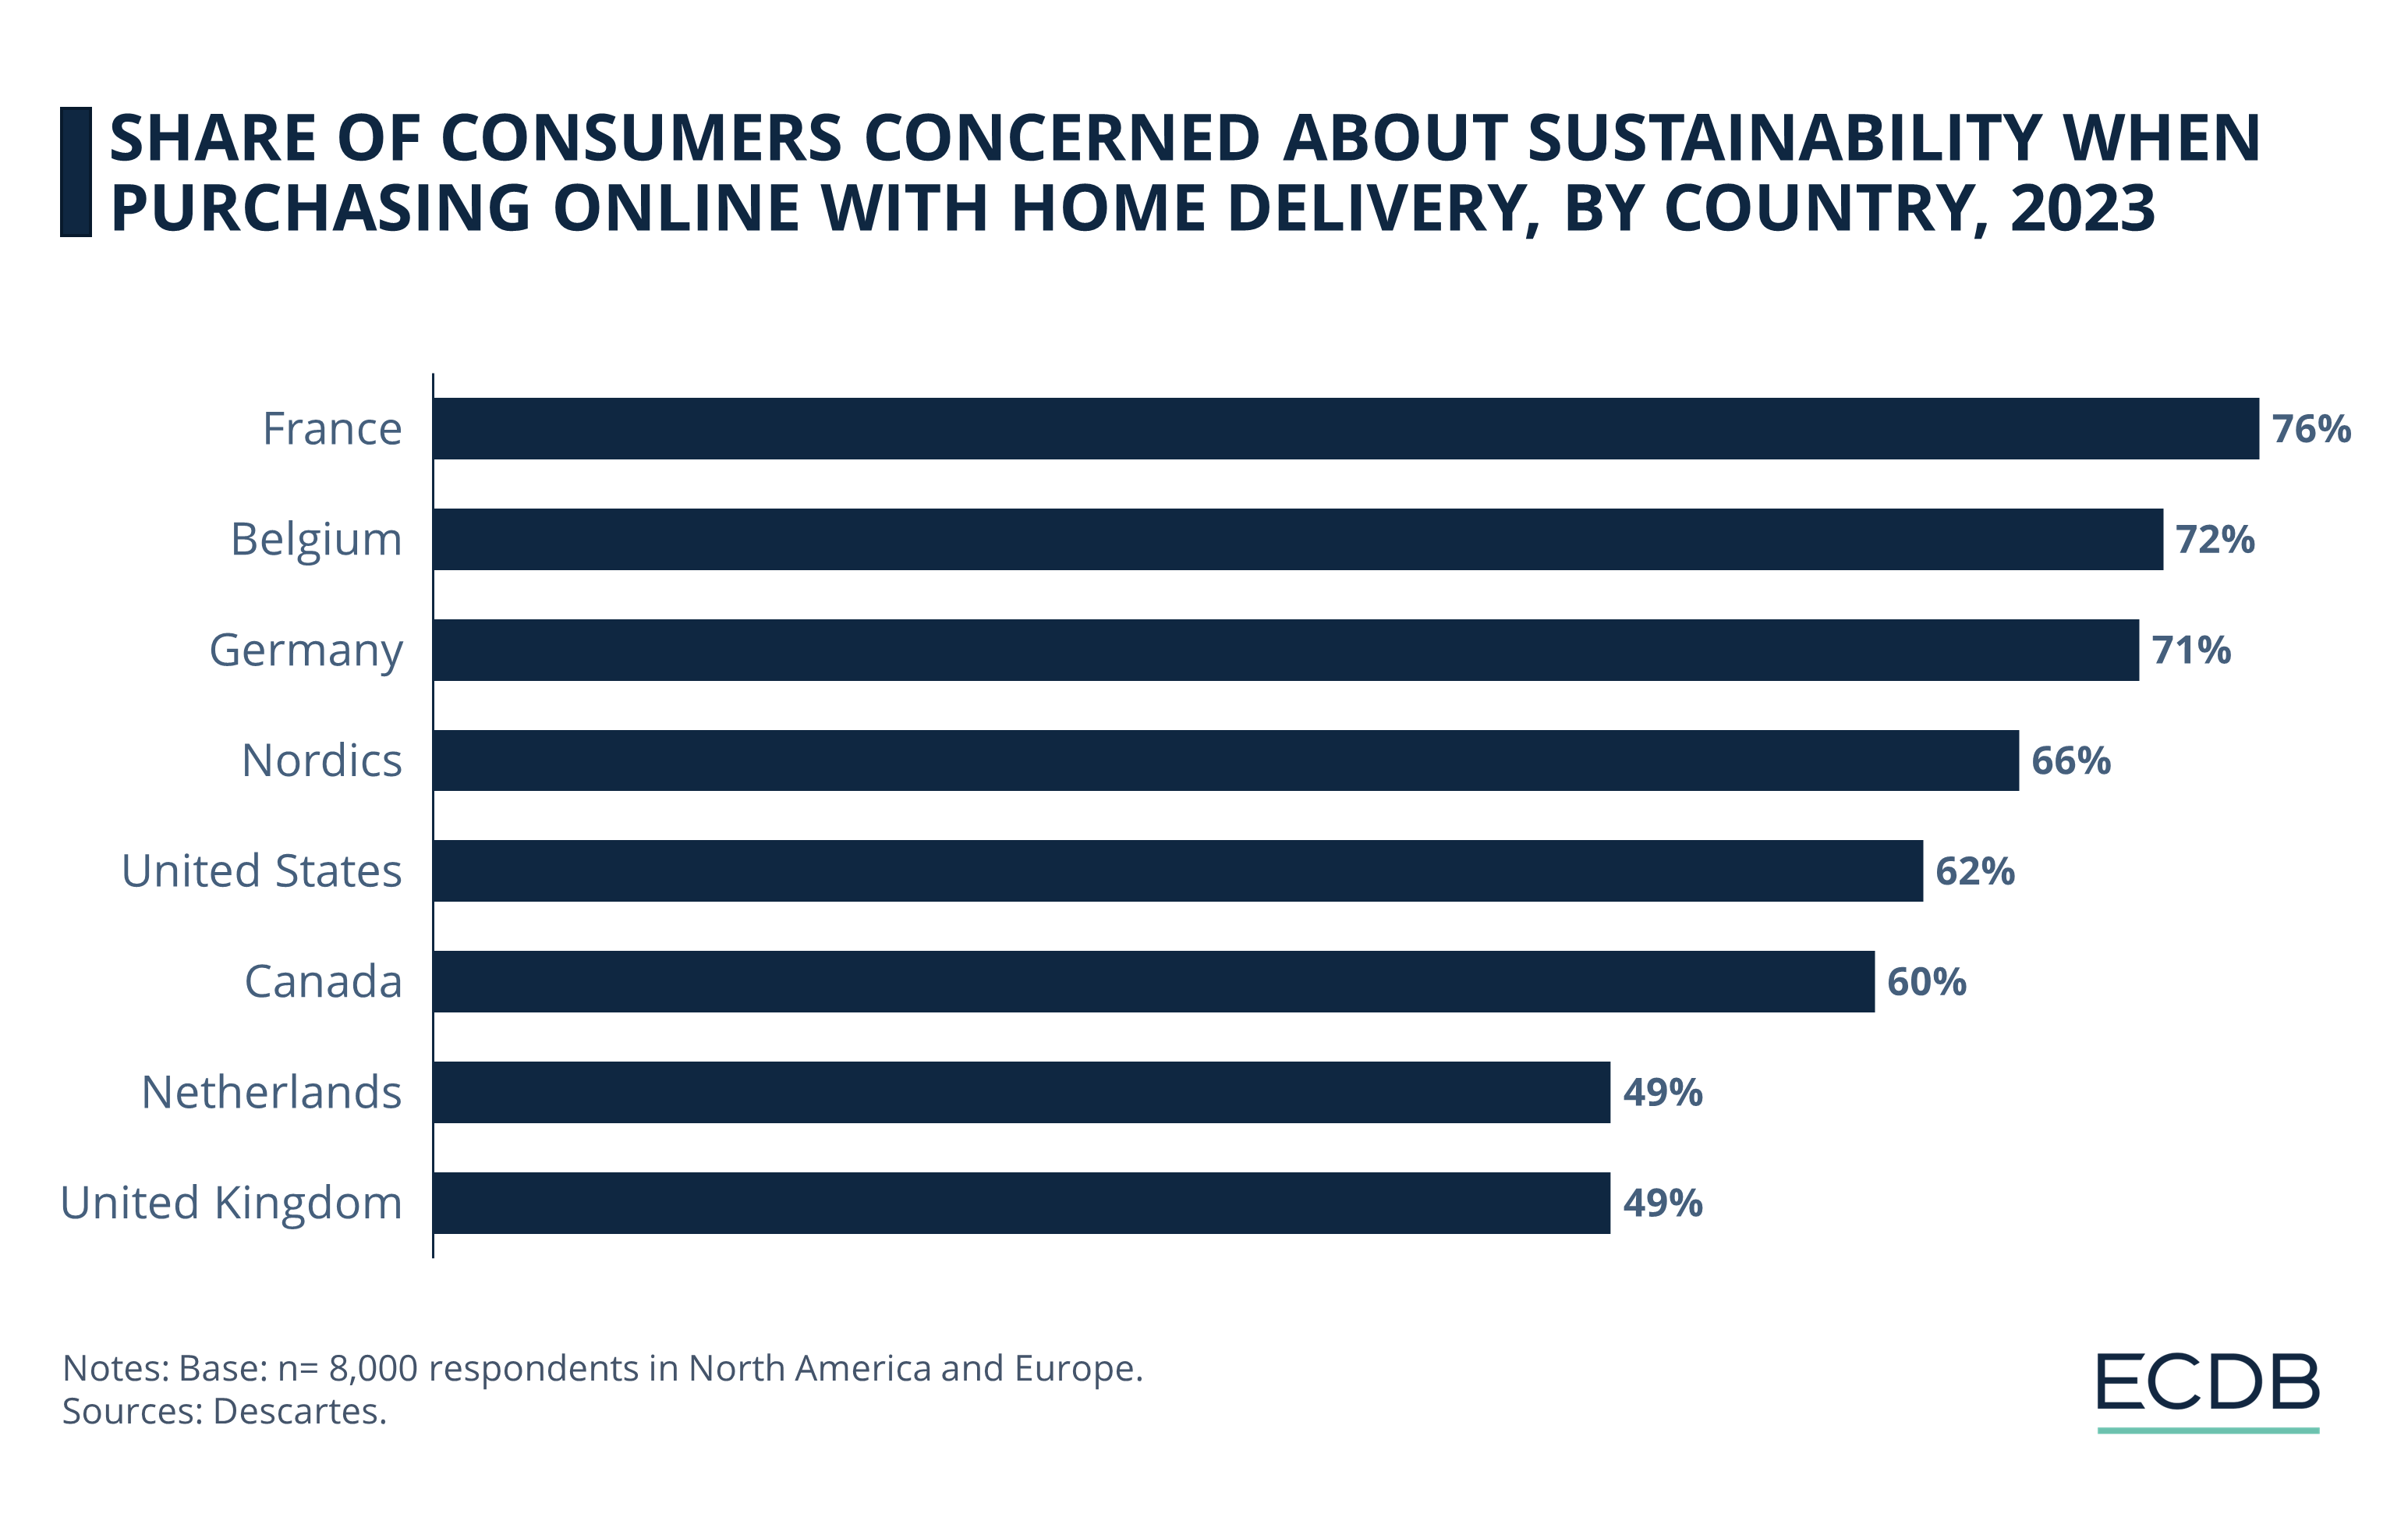 Share of consumers concerned about sustainability when purchasing online with home delivery in 2023, by country